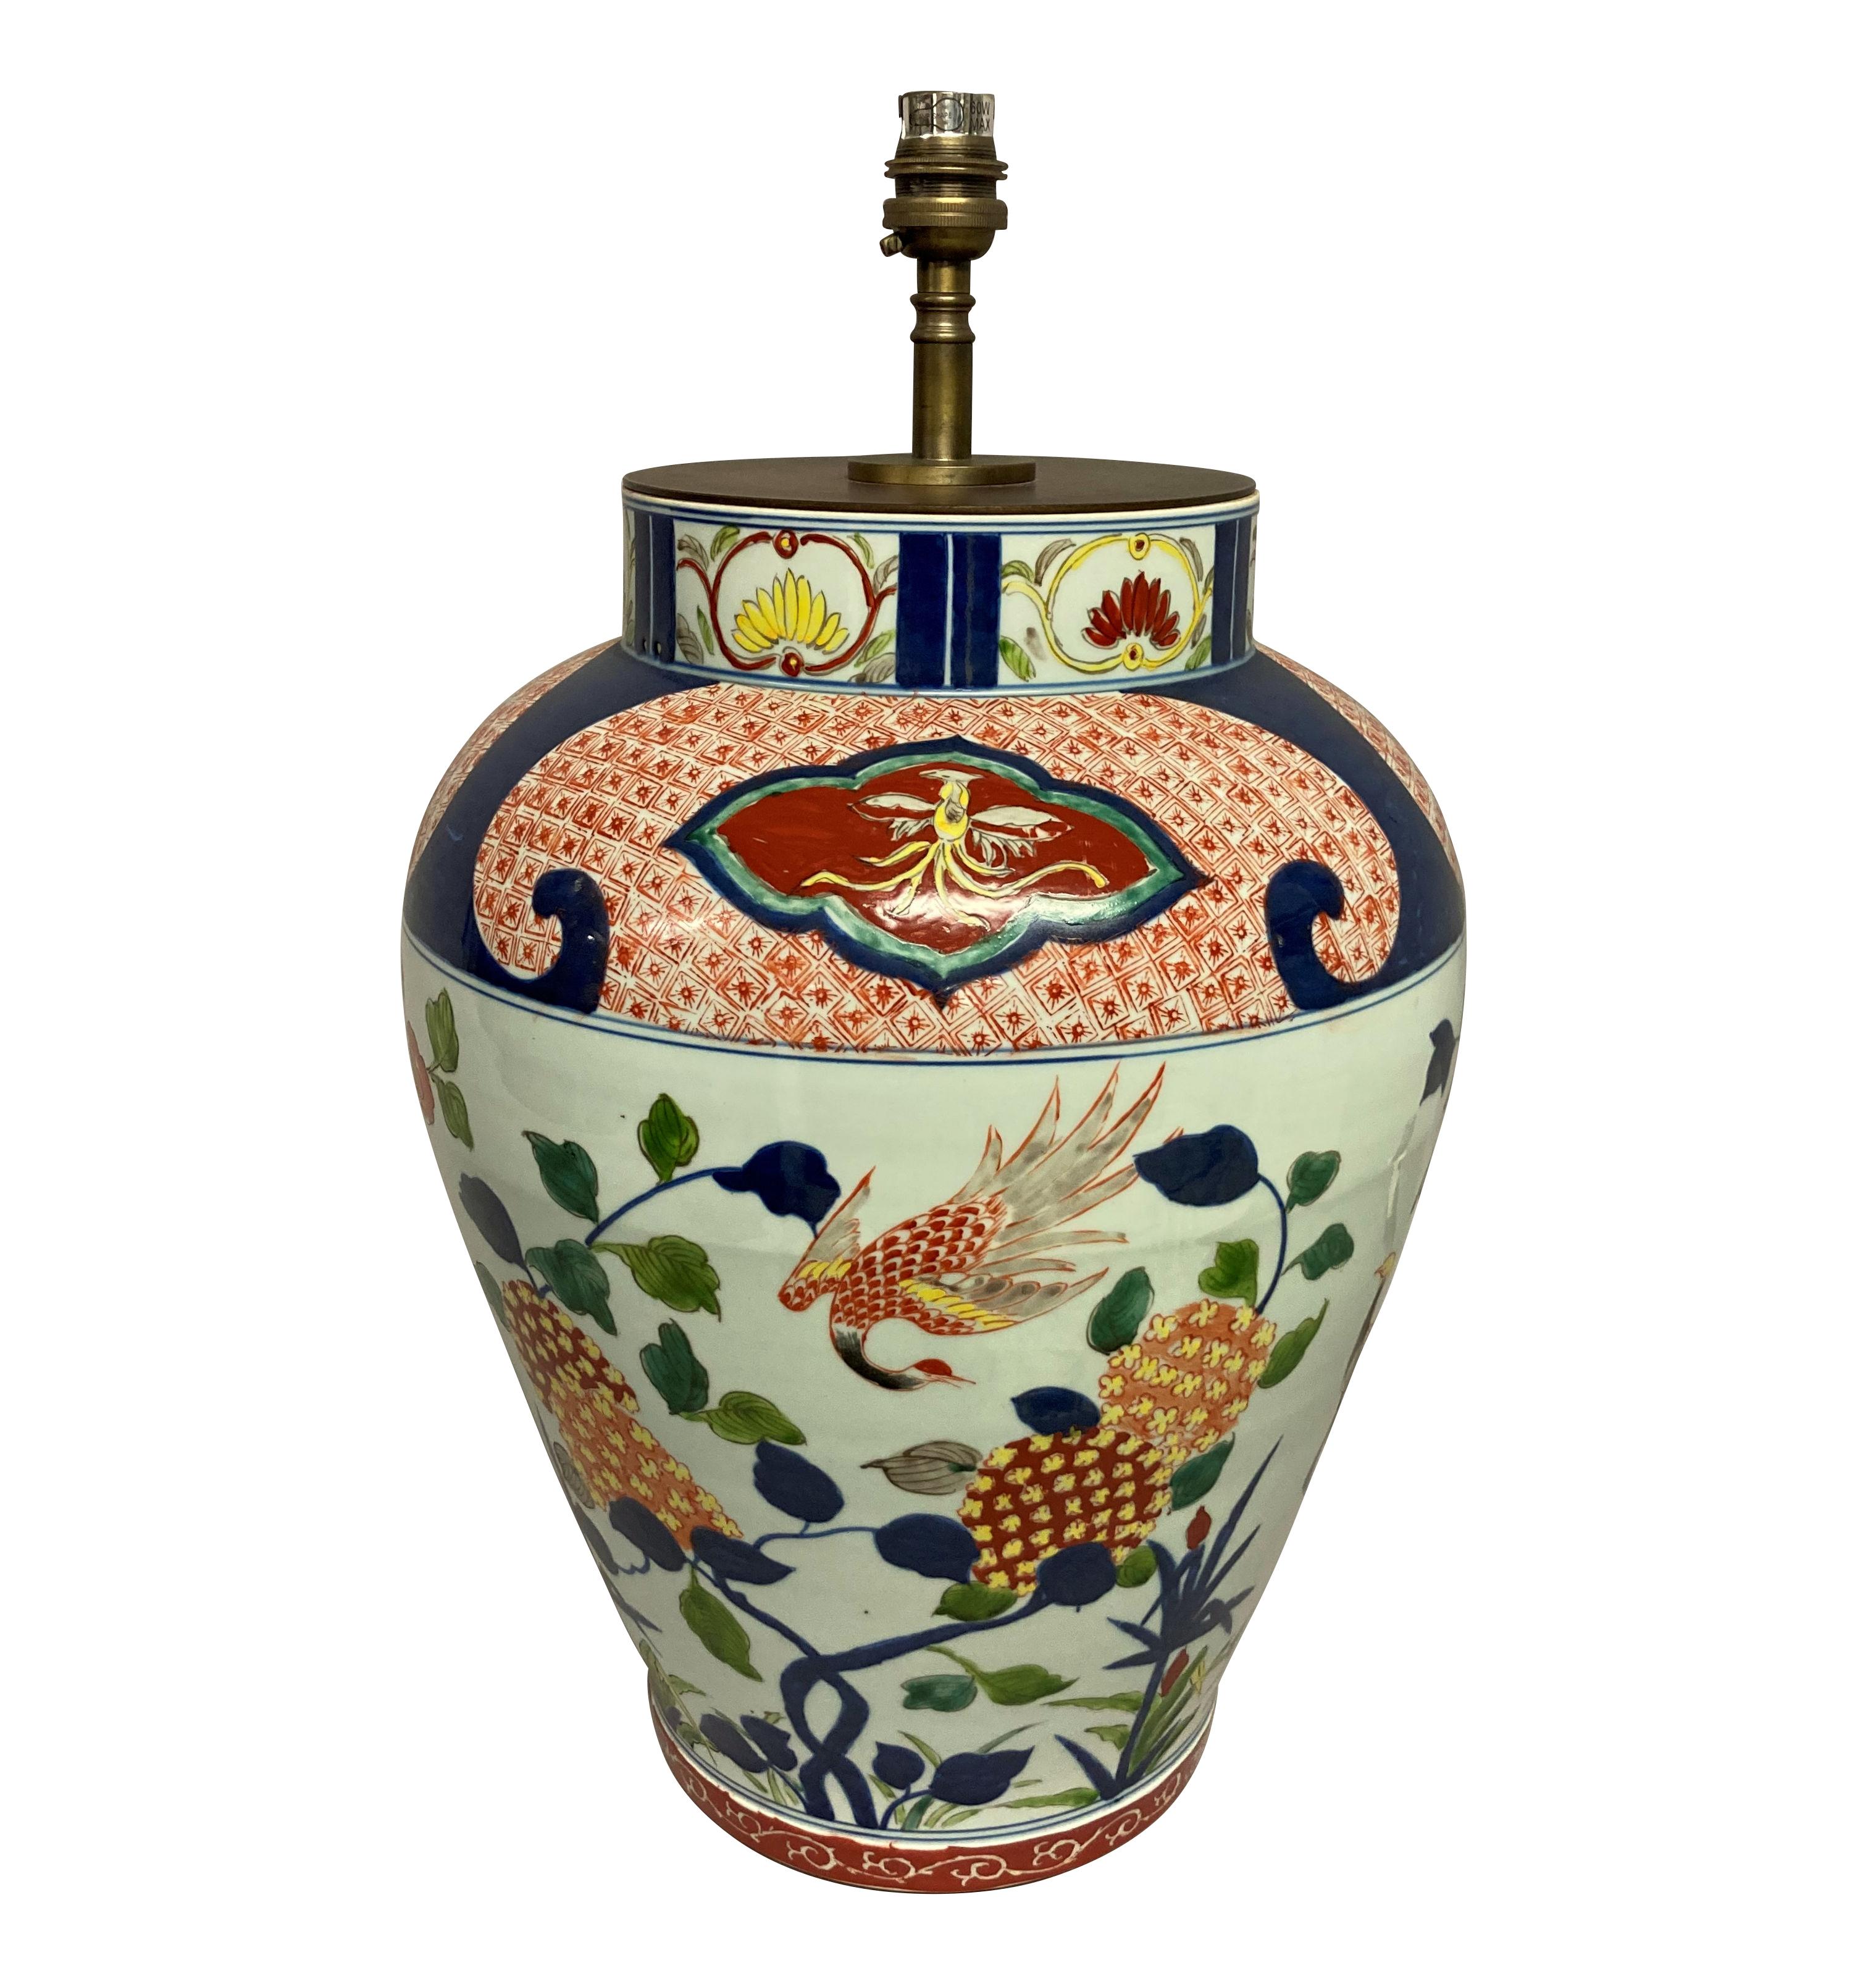 A good pair of hand painted Imari vase lamps, depicting flowers, foliage, lotus and peacock's. With good bronze fittings and pleated silk shades.

Measure: 49cm high (71cm high with shades) x 28cm diameter (47cm diameter shades).